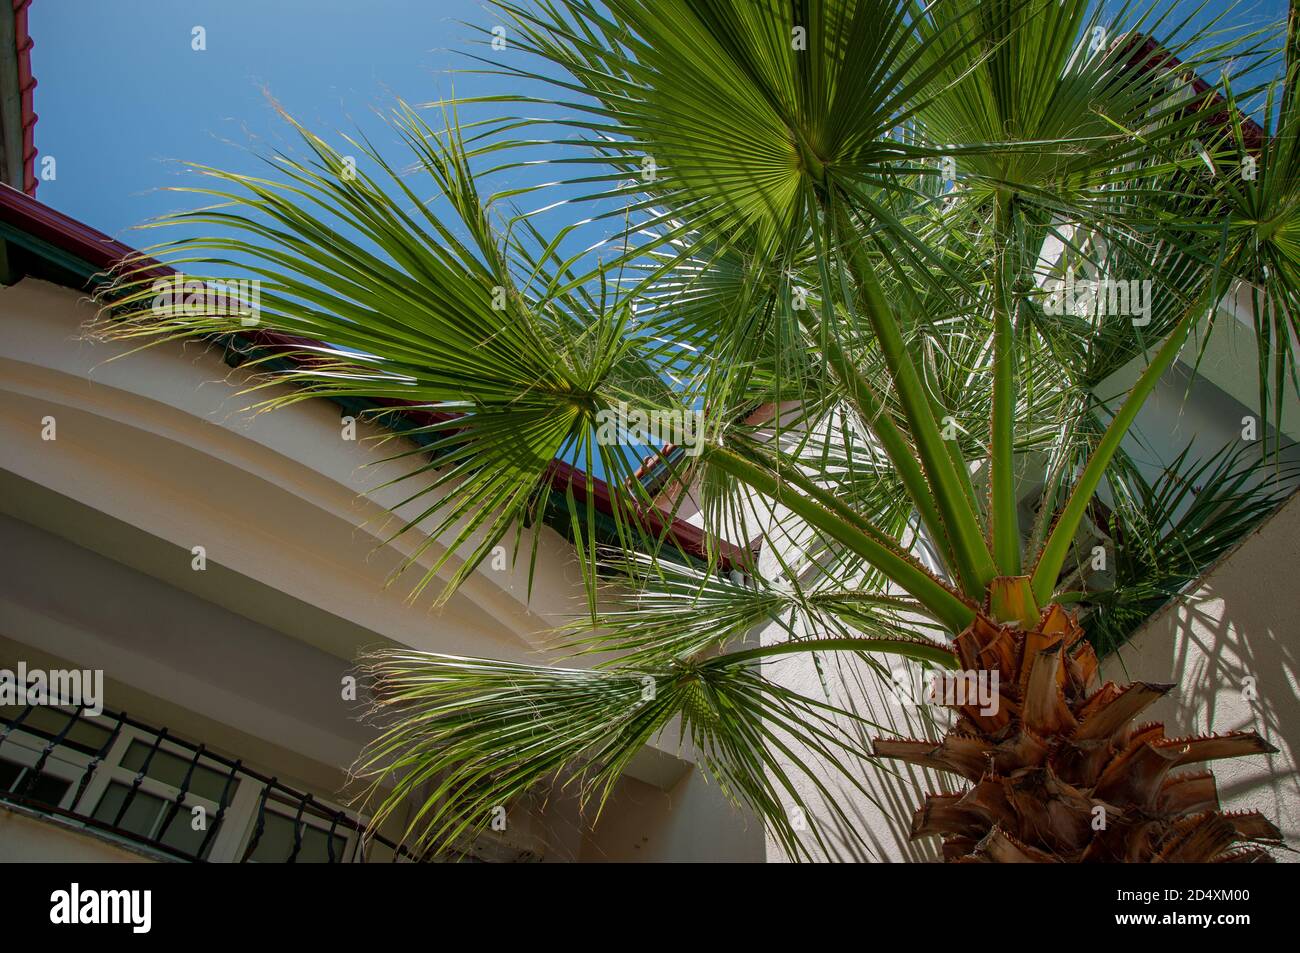 A large palm tree, Trachycarpus fortunei, growing beside a Mediterranean vacation villa low angle under a blue sky Stock Photo